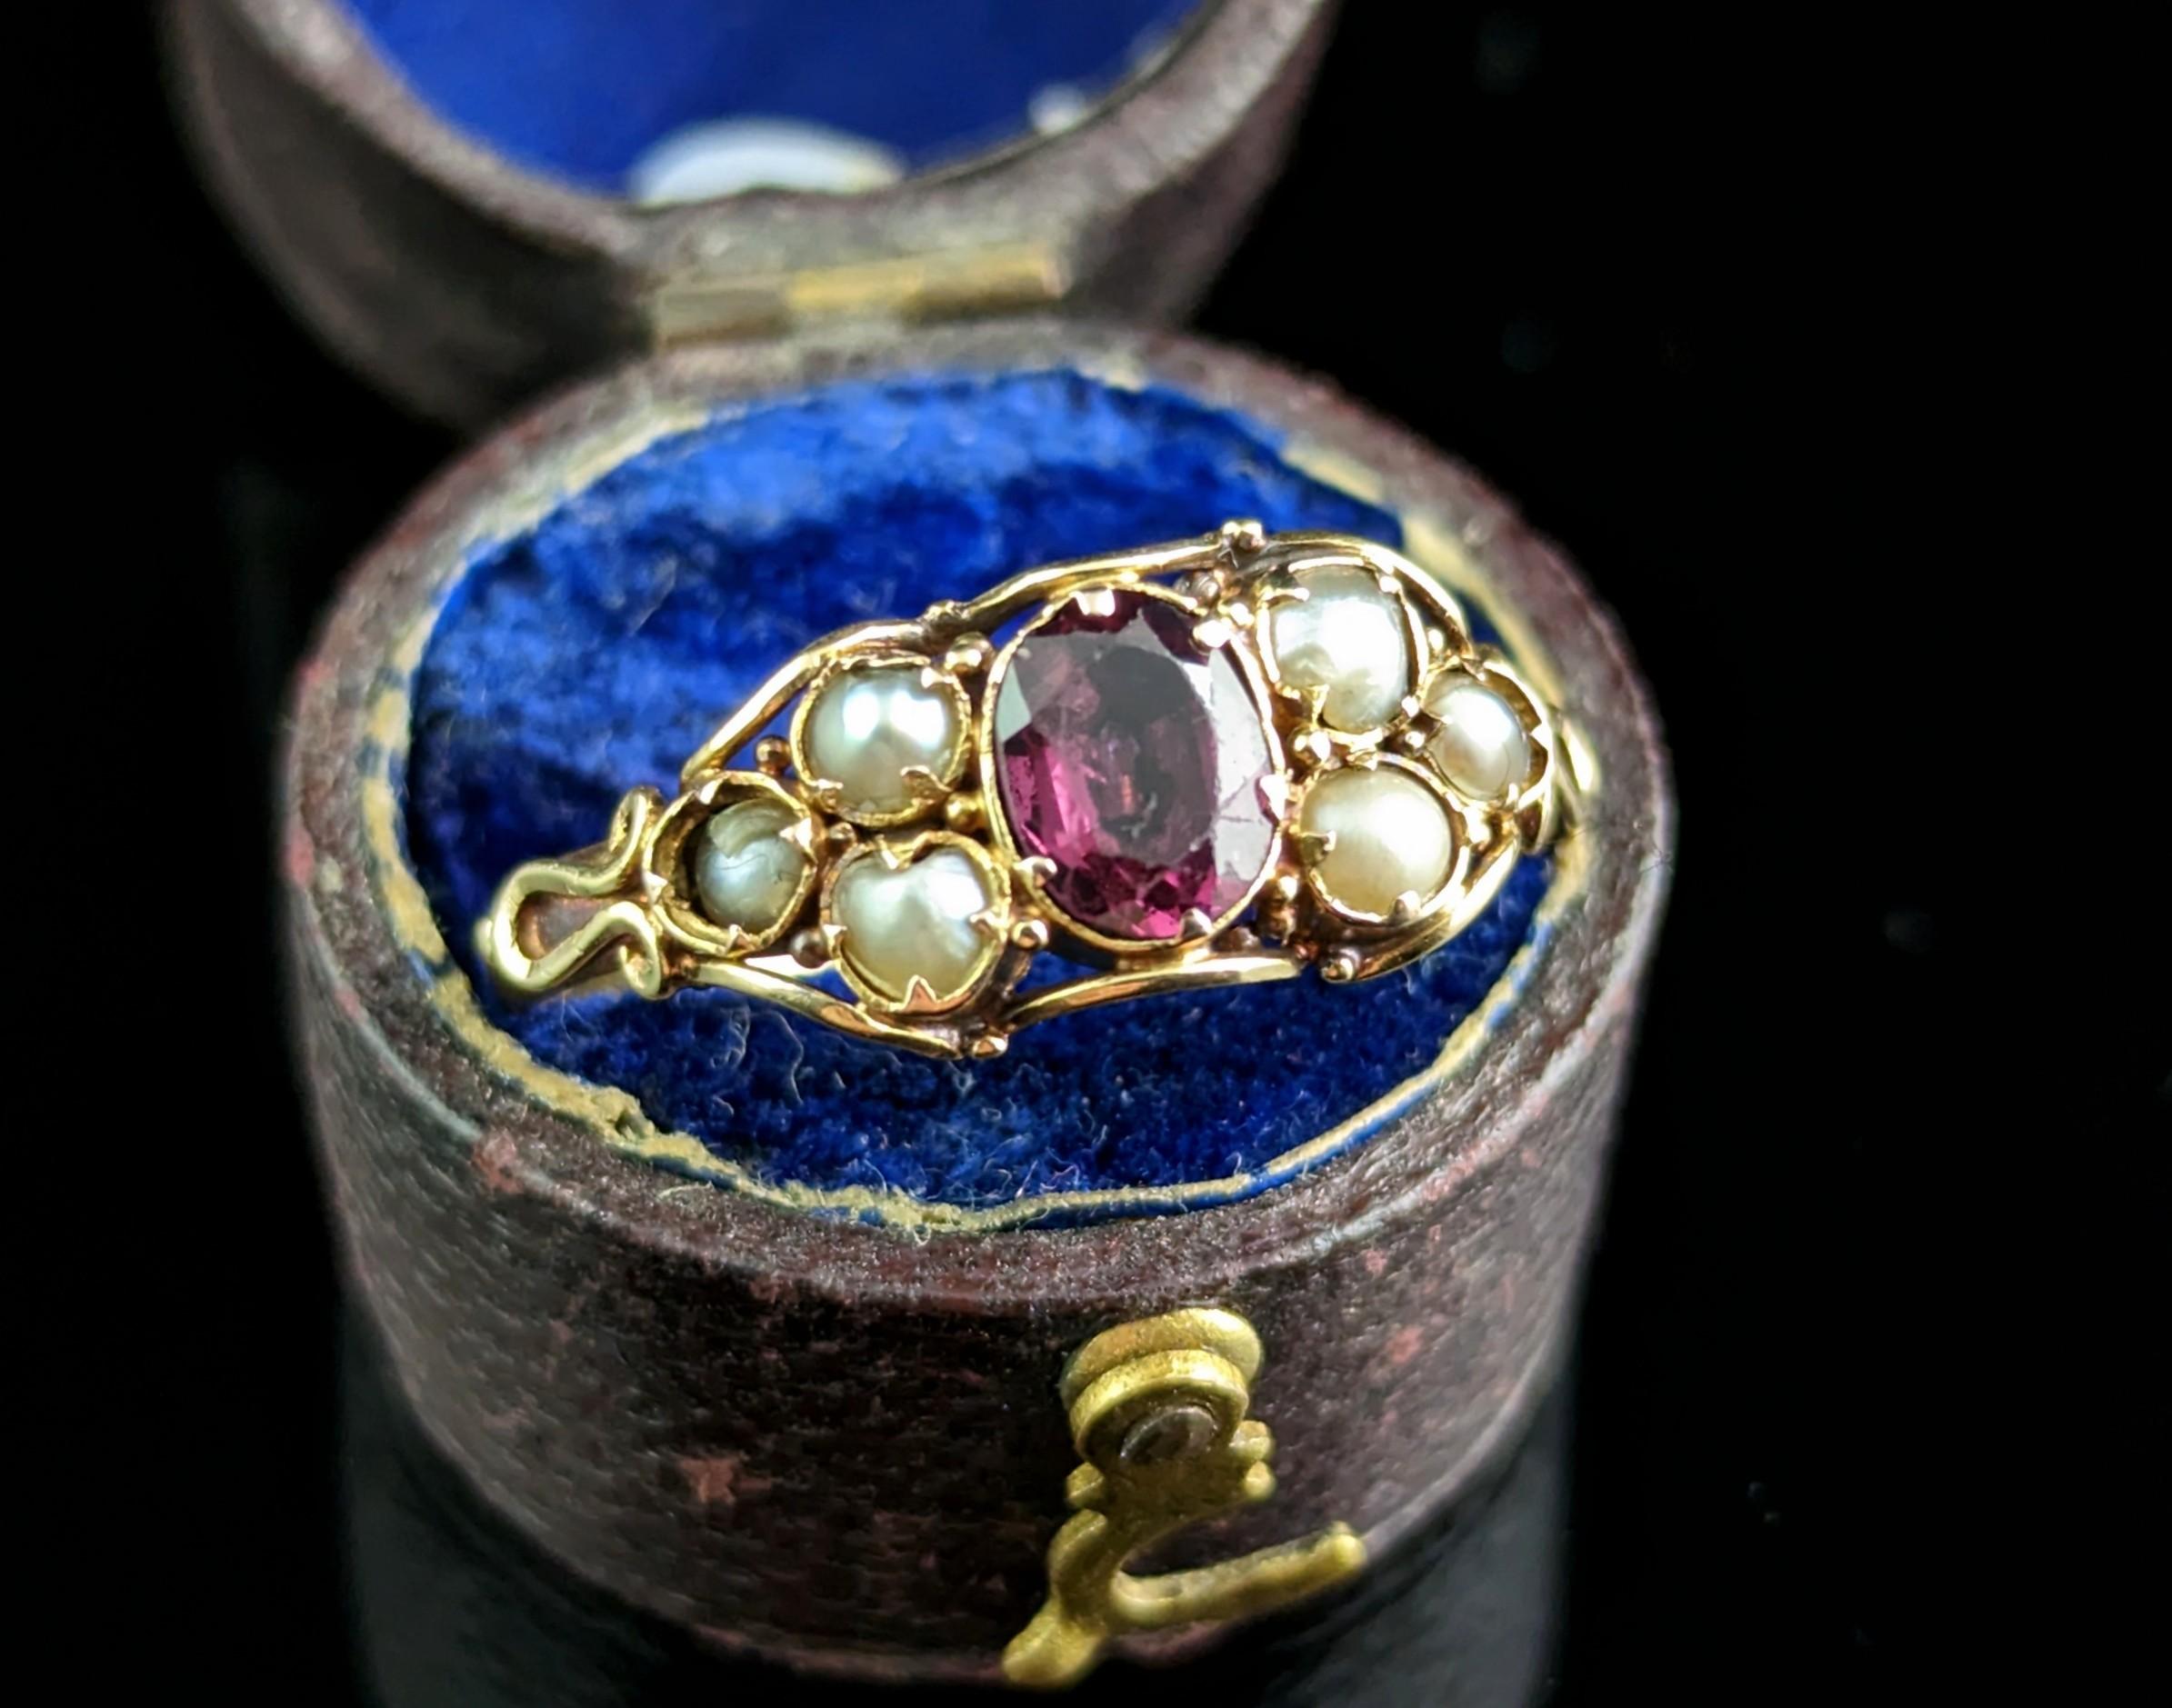 Antique Almandine Garnet and Pearl Ring, 22k Yellow Gold 2